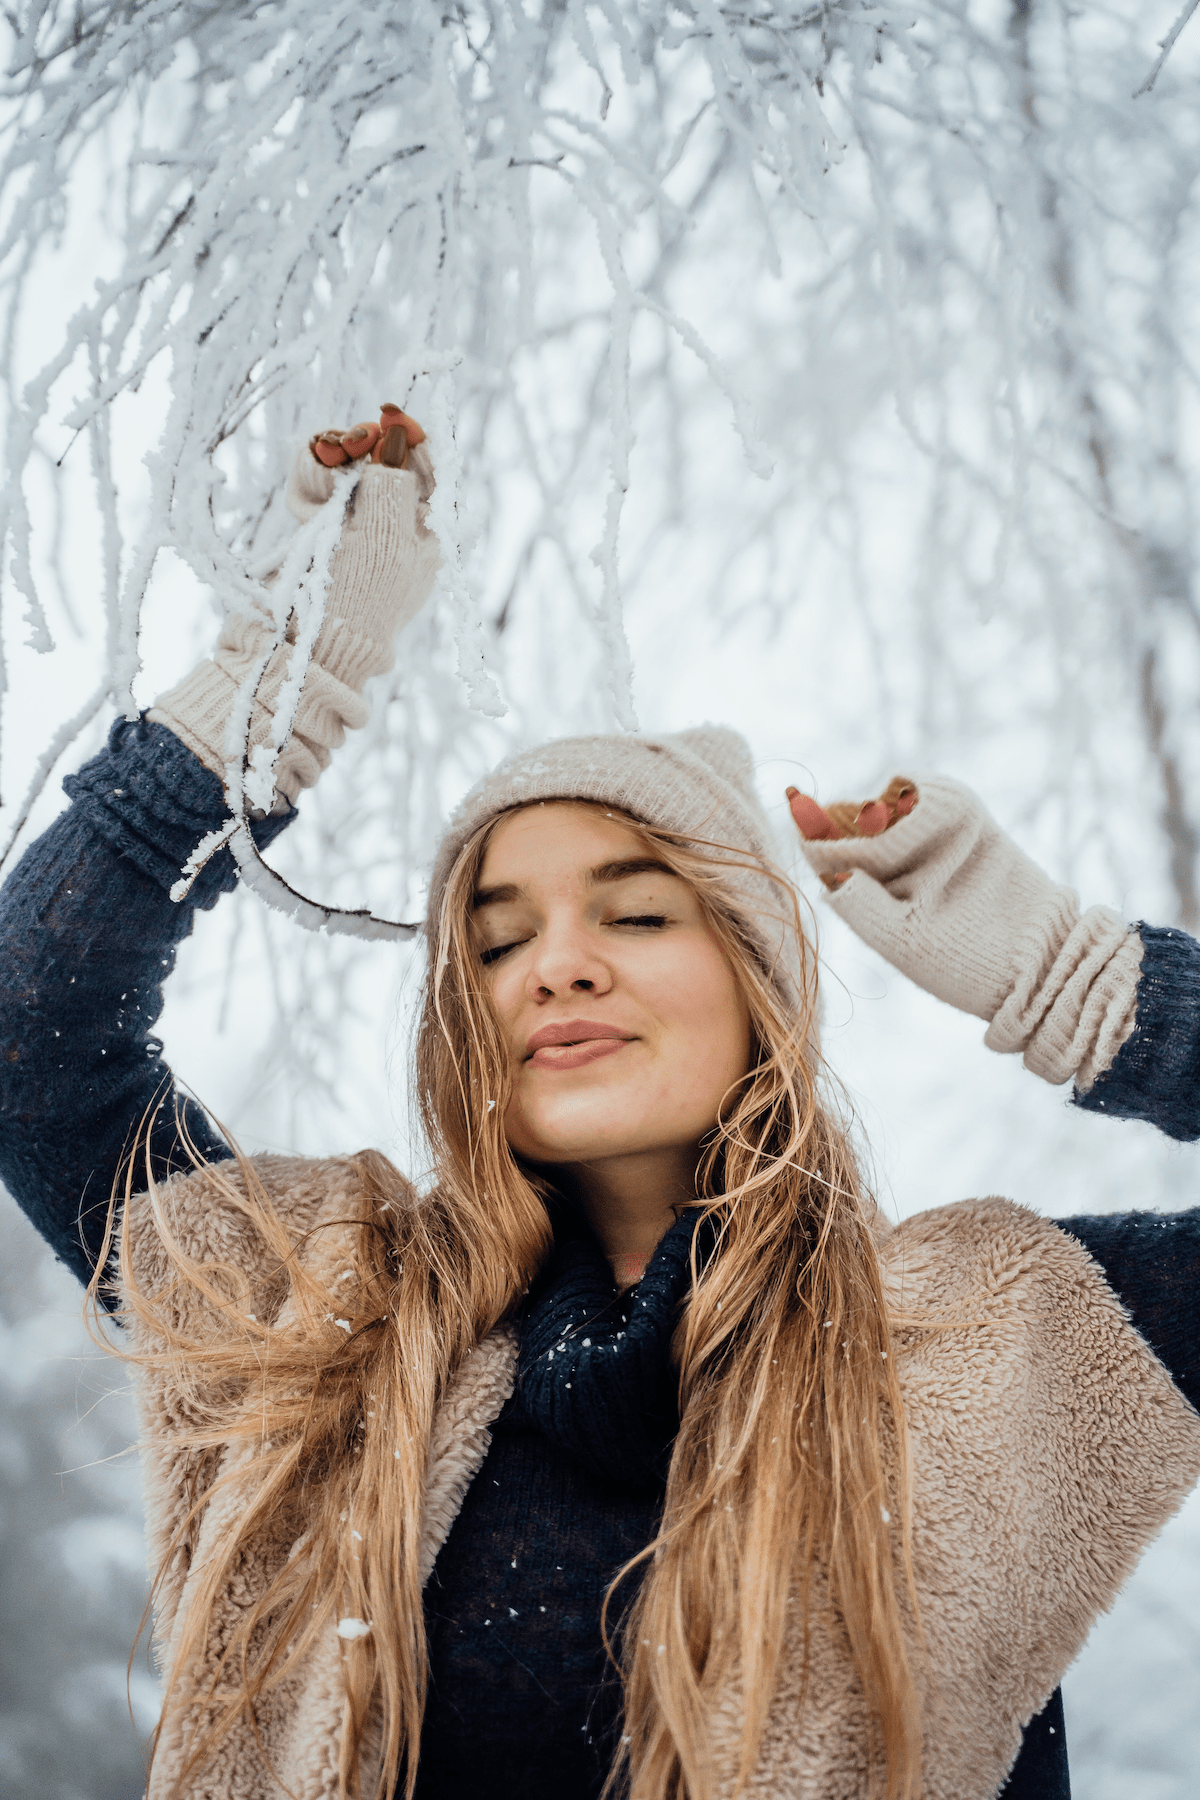 7 Winter Hair Care Tips to Save Your Hair from Winter Damage